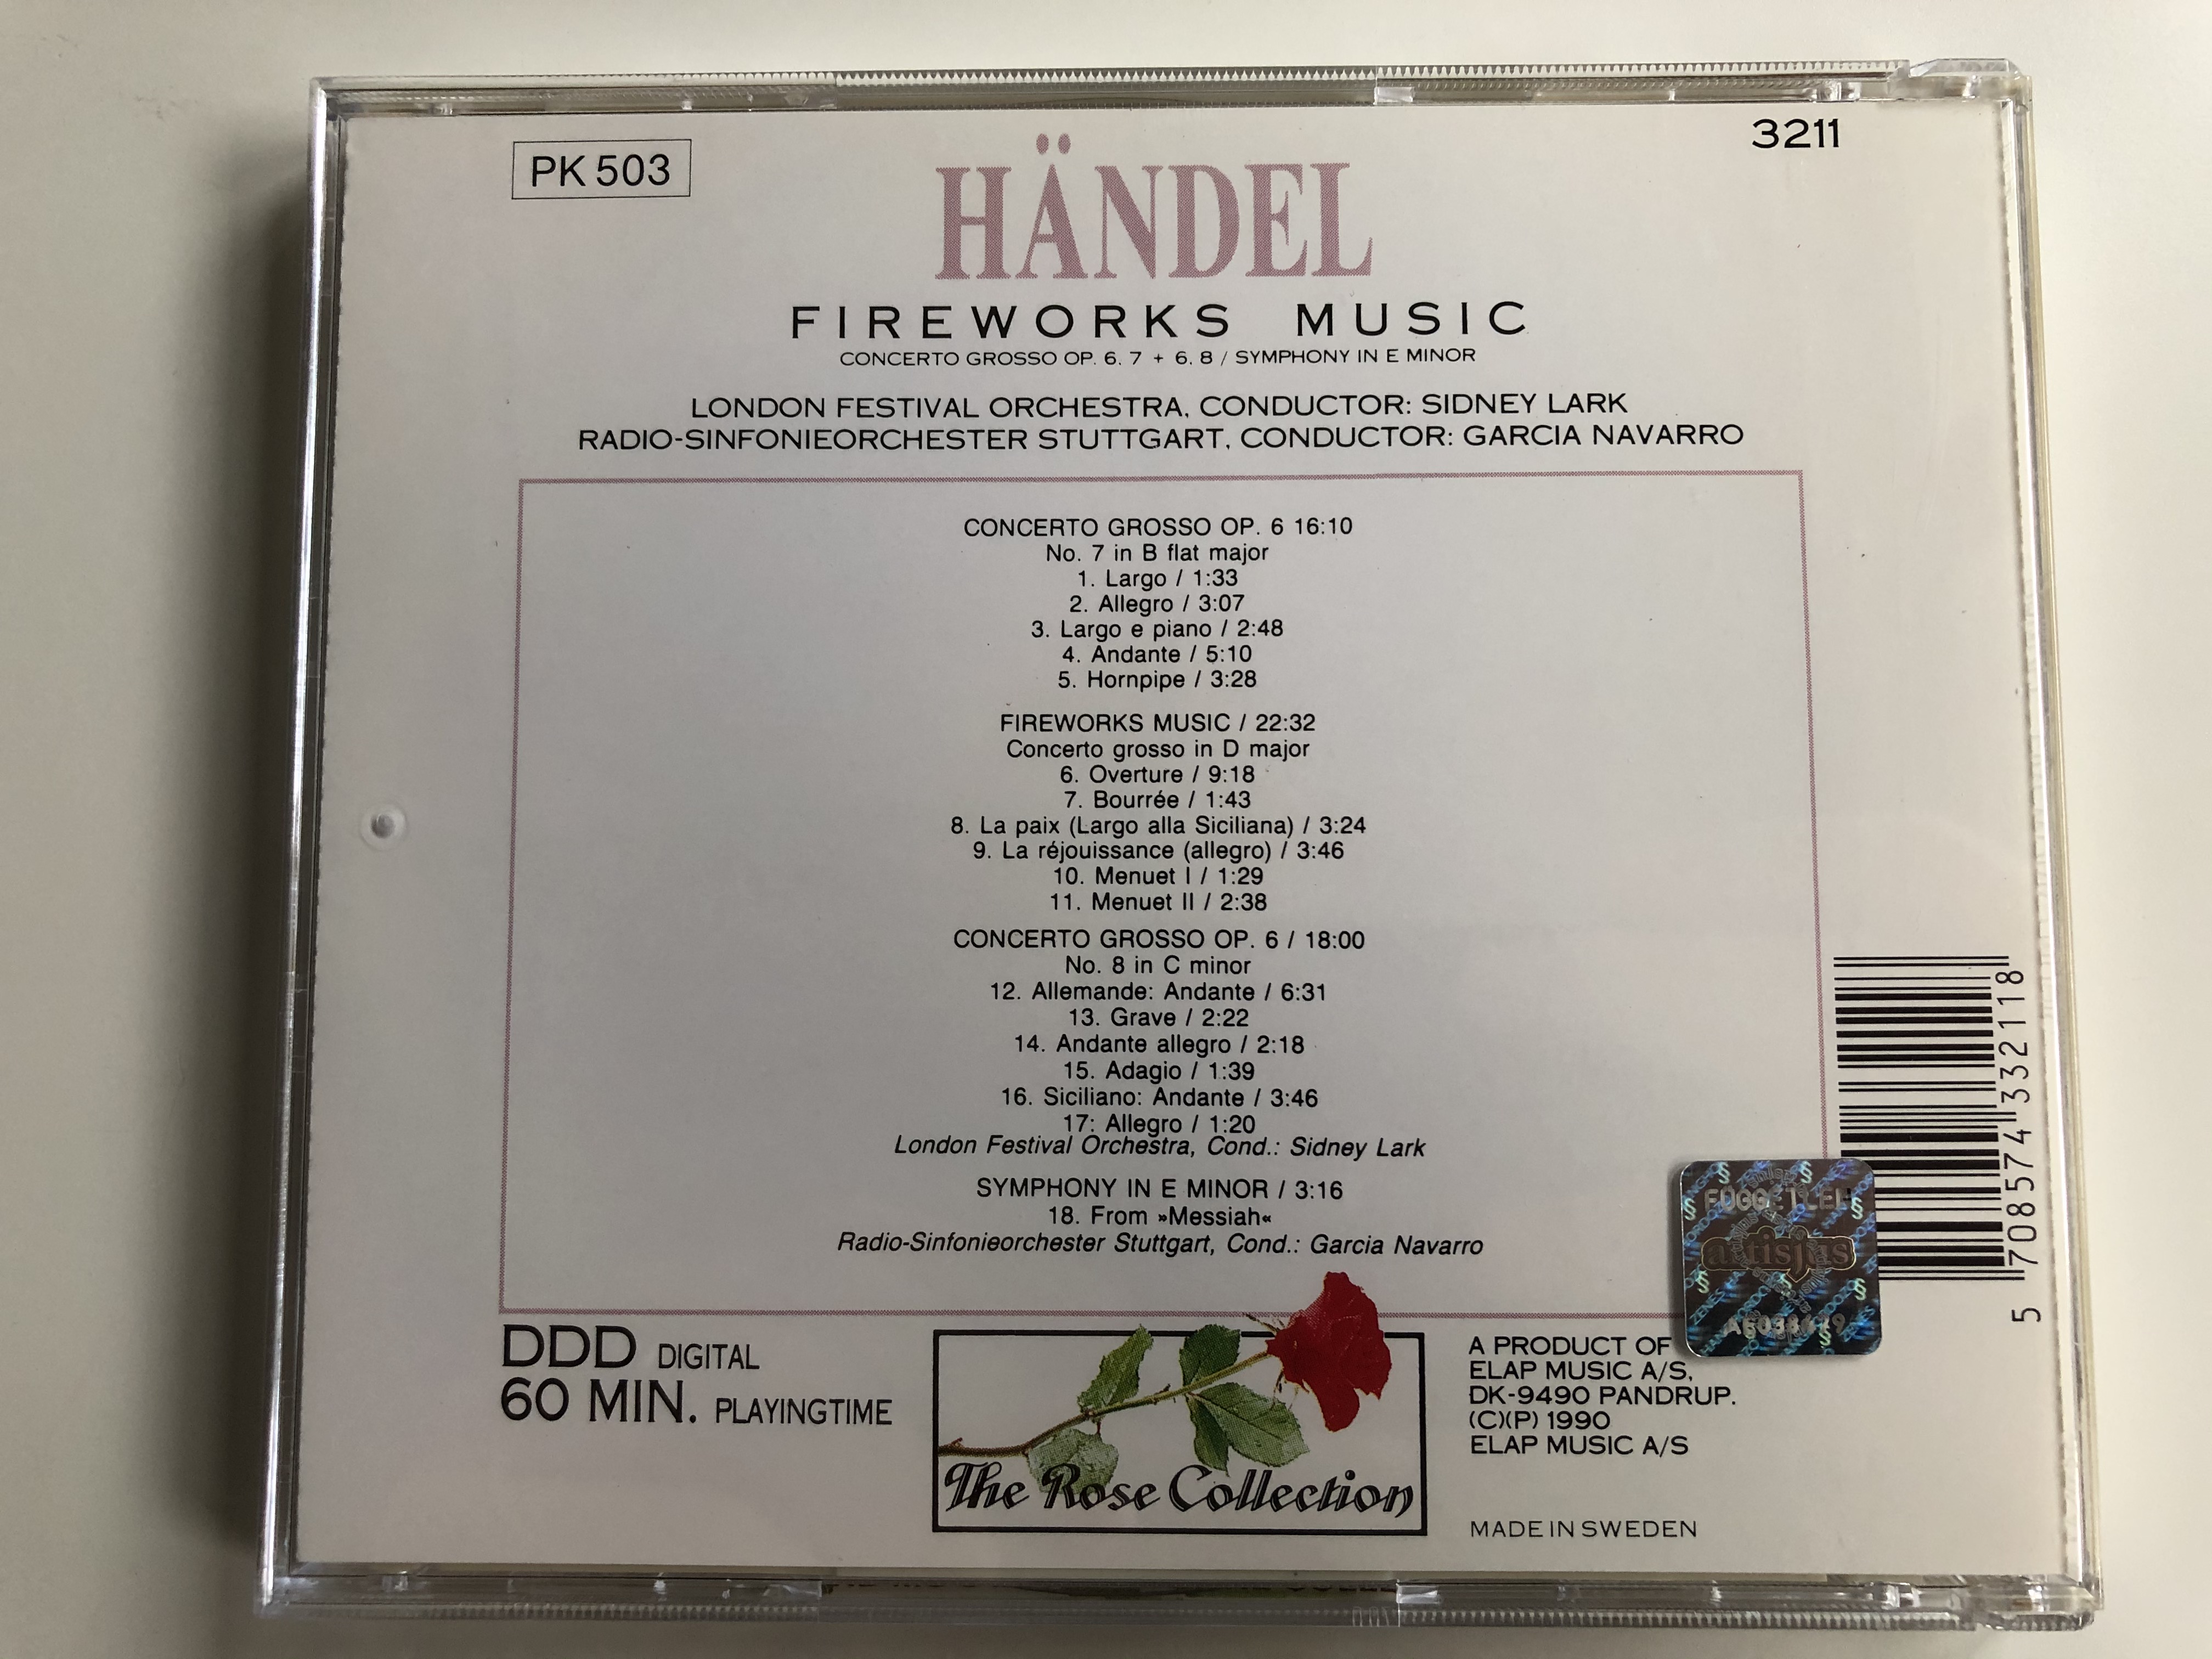 h-ndel-fireworks-music-concerto-grosso-op.-6.-7-6.-8-symphony-in-e-minor-playingtime-60-min.-elap-audio-cd-1990-3211cd-3-.jpg